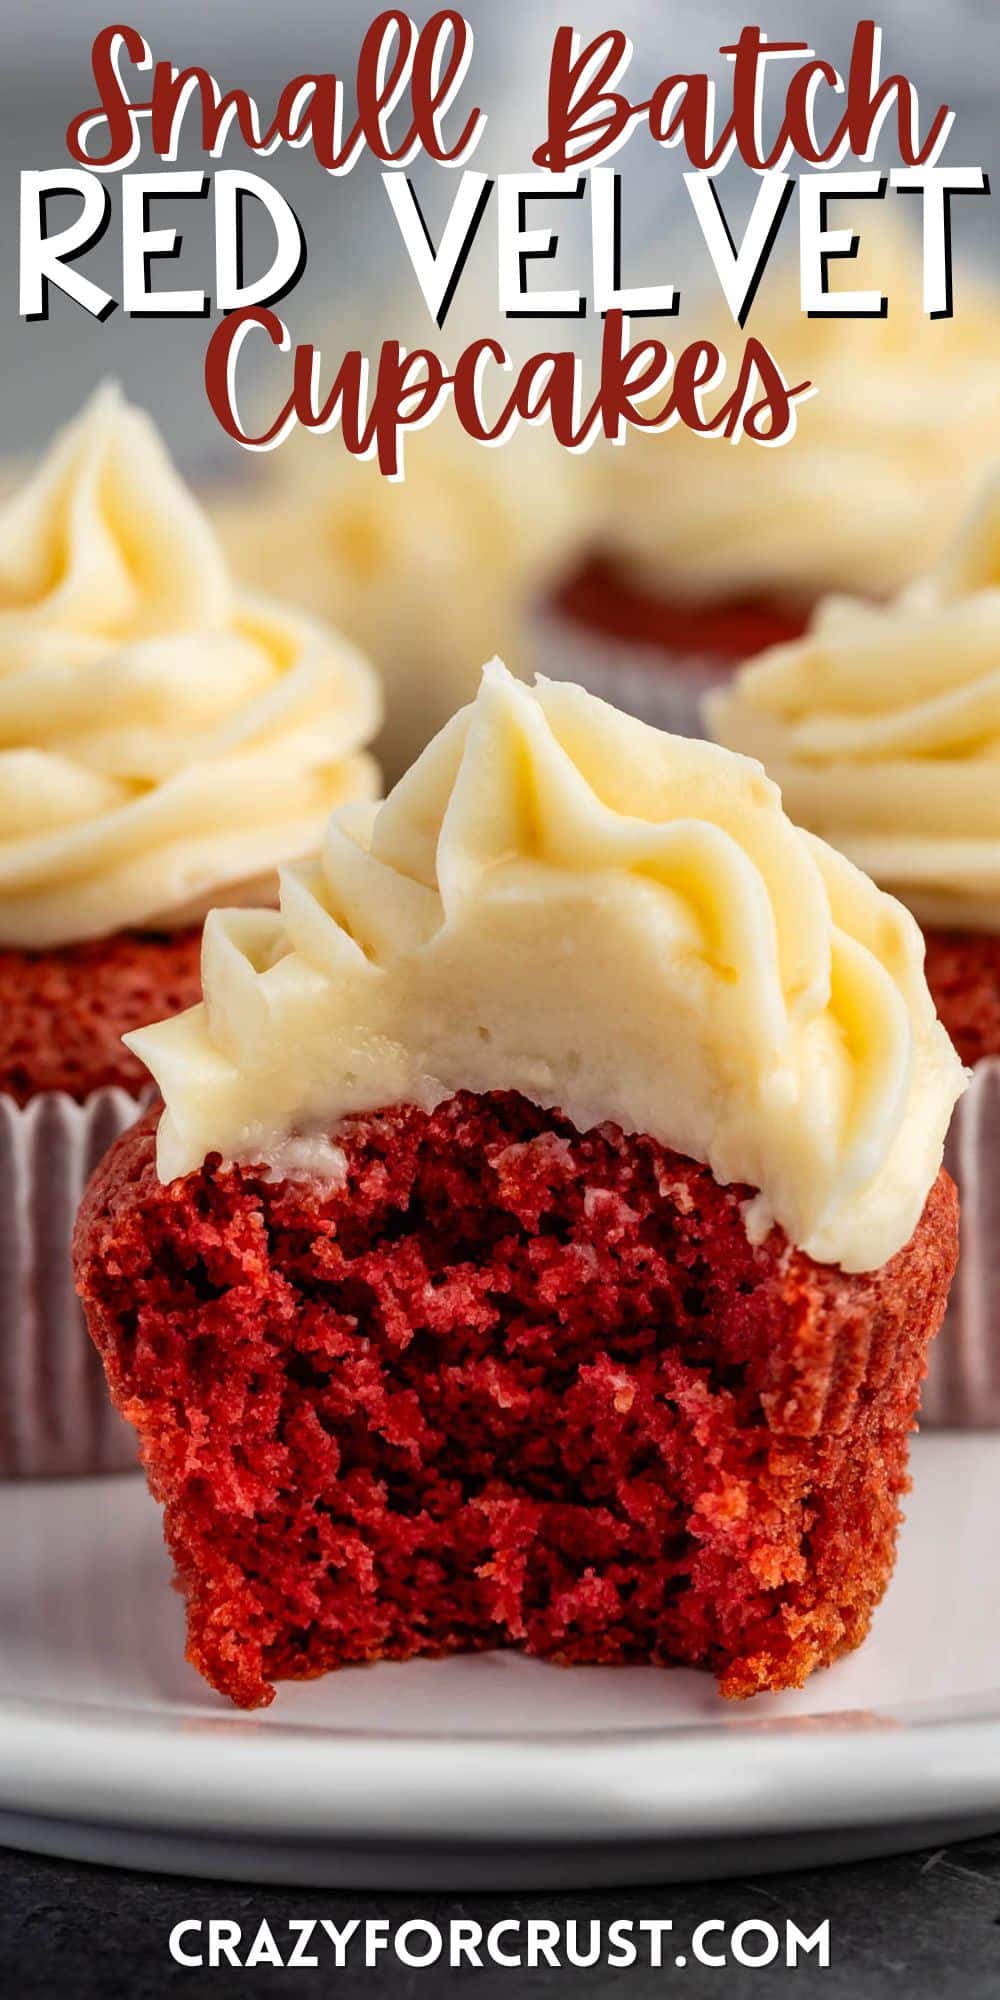 red cupcakes with frosting on top on a white plate with words on the image.